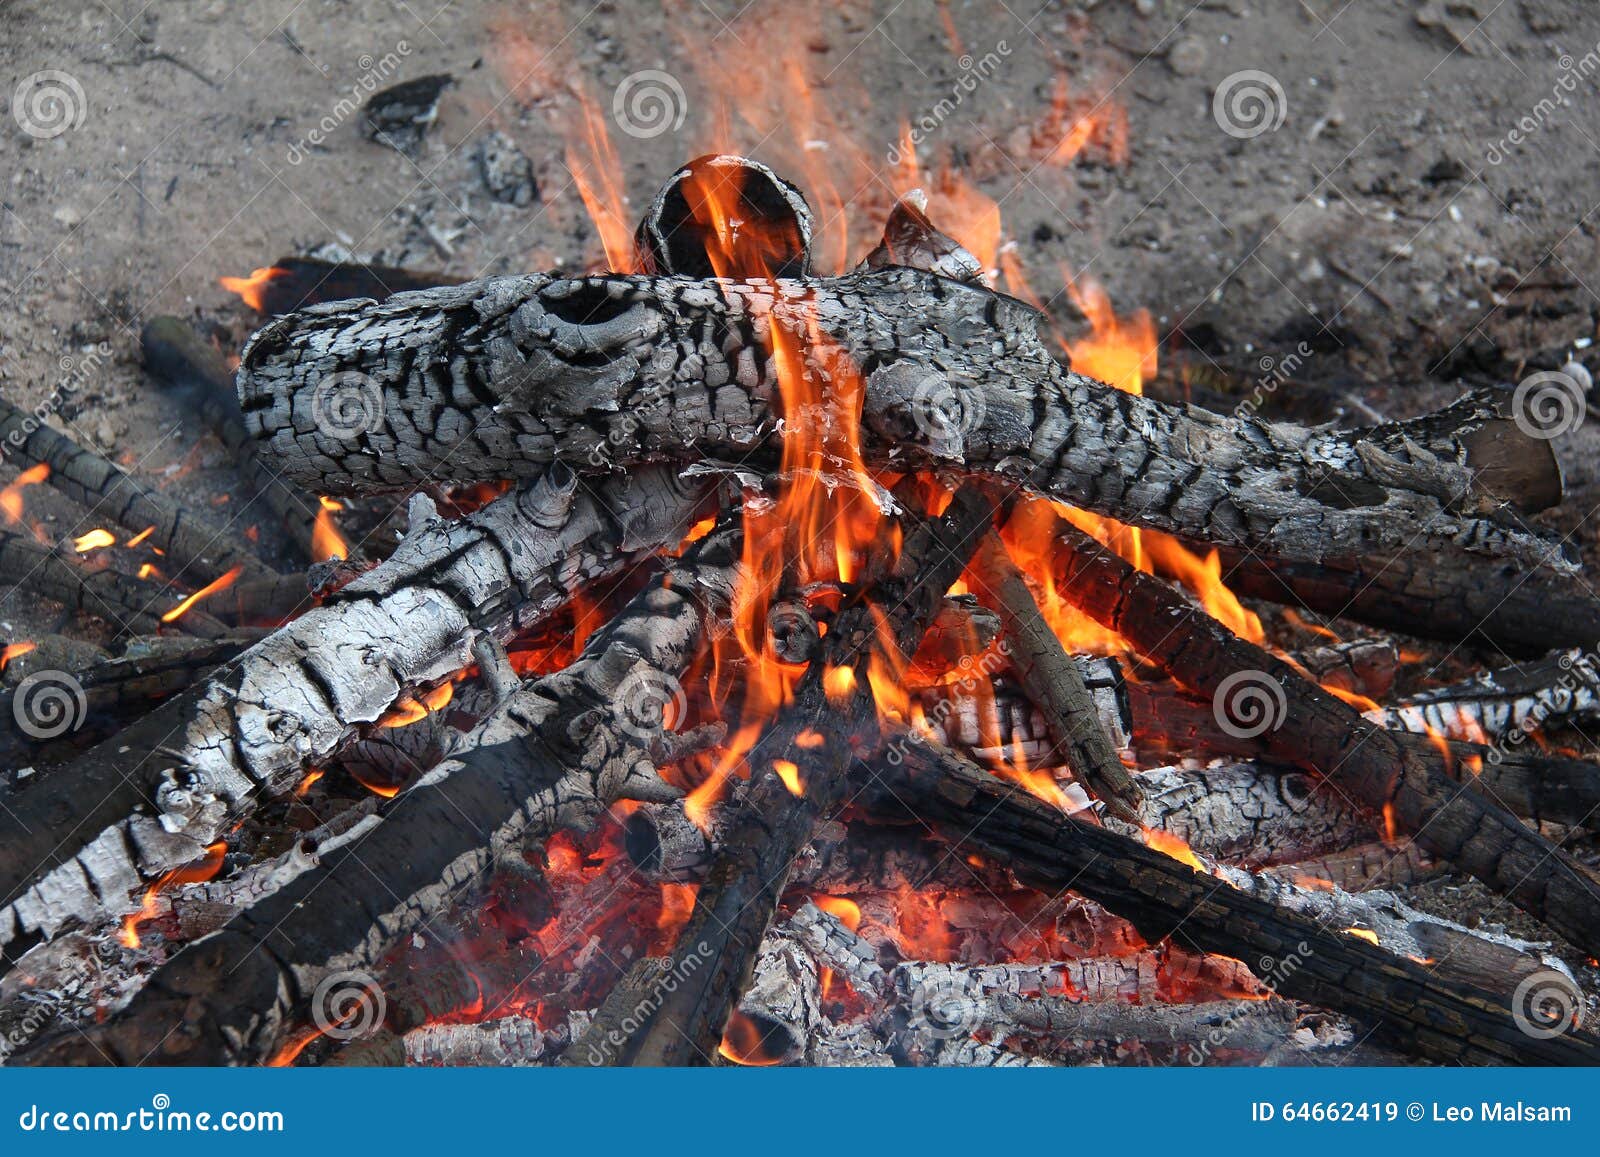 Bonfire stock image. Image of fire, heat, sparks, campfire - 64662419